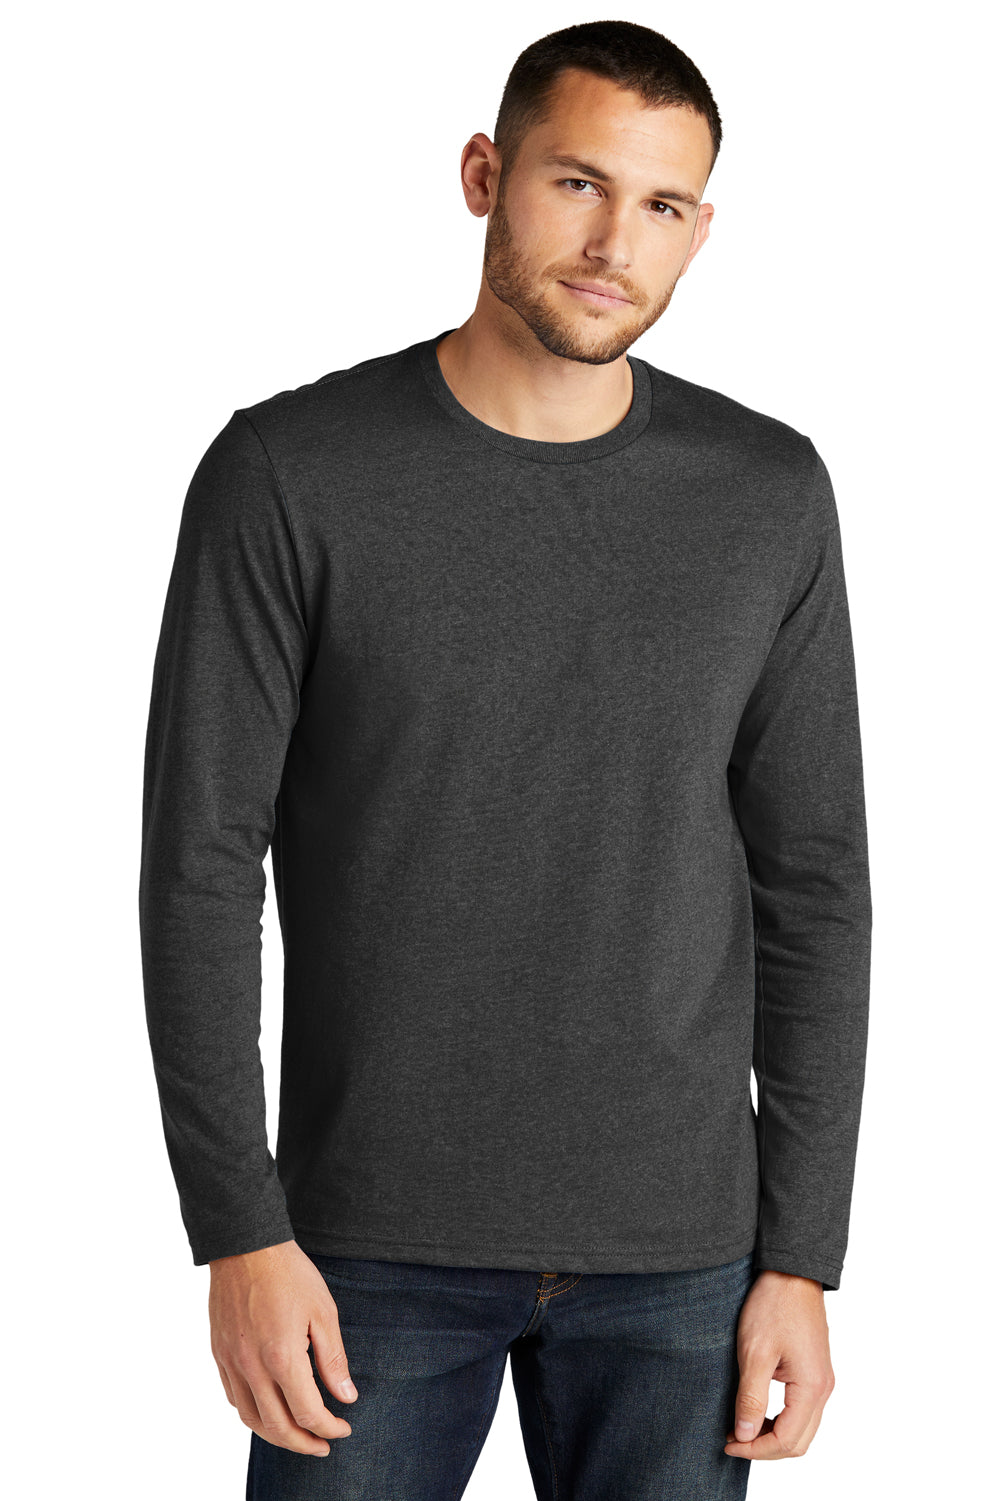 District DT8003 Re-Tee Long Sleeve Crewneck T-Shirt Heather Charcoal Grey Front